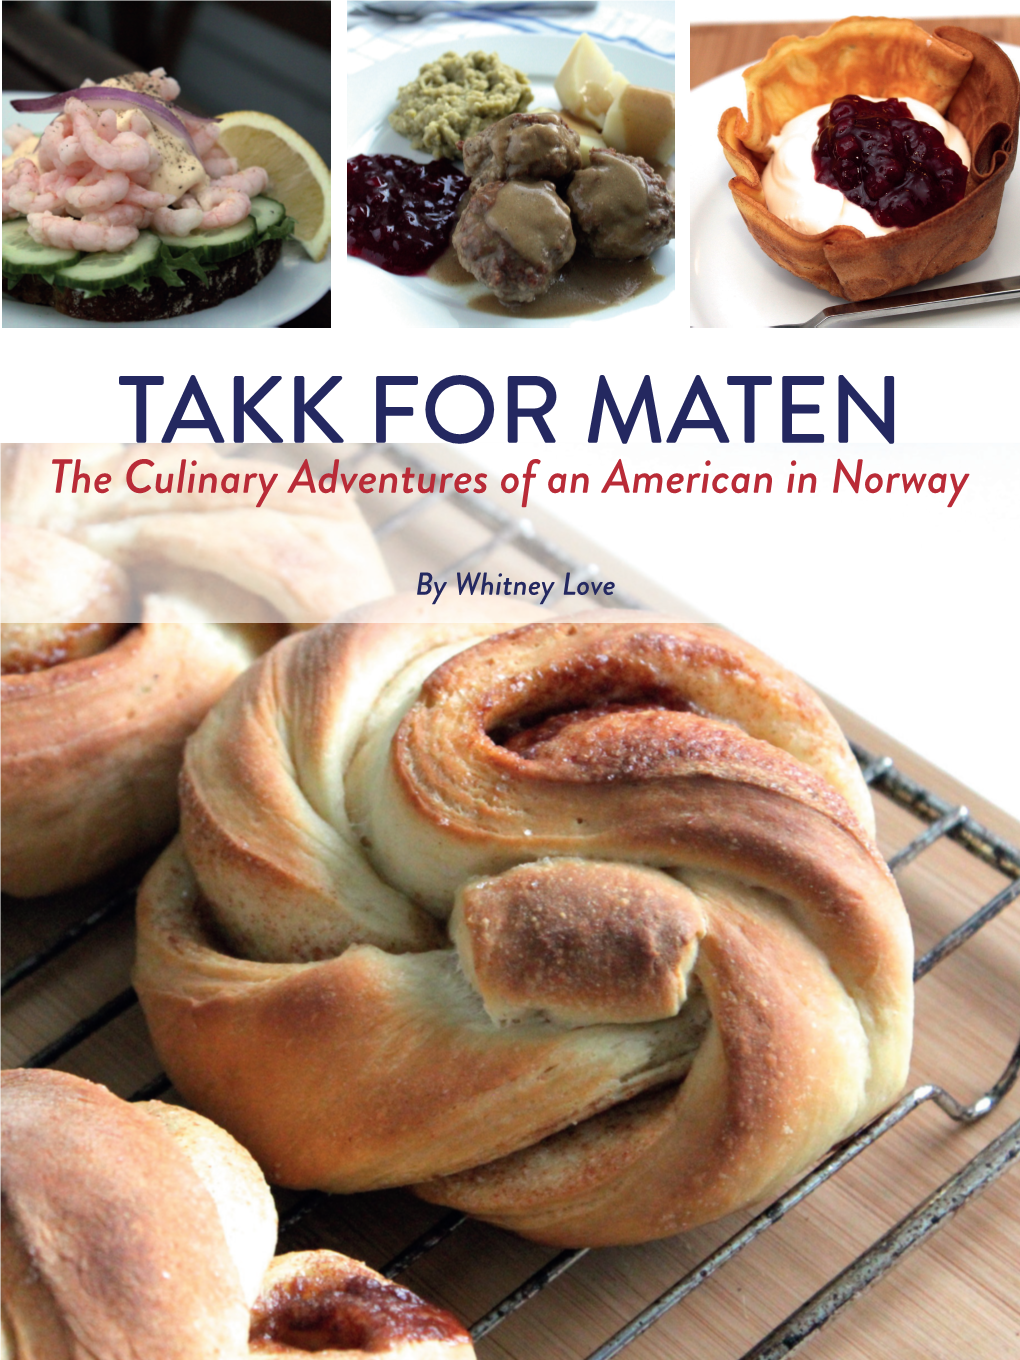 The Culinary Adventures of an American in Norway